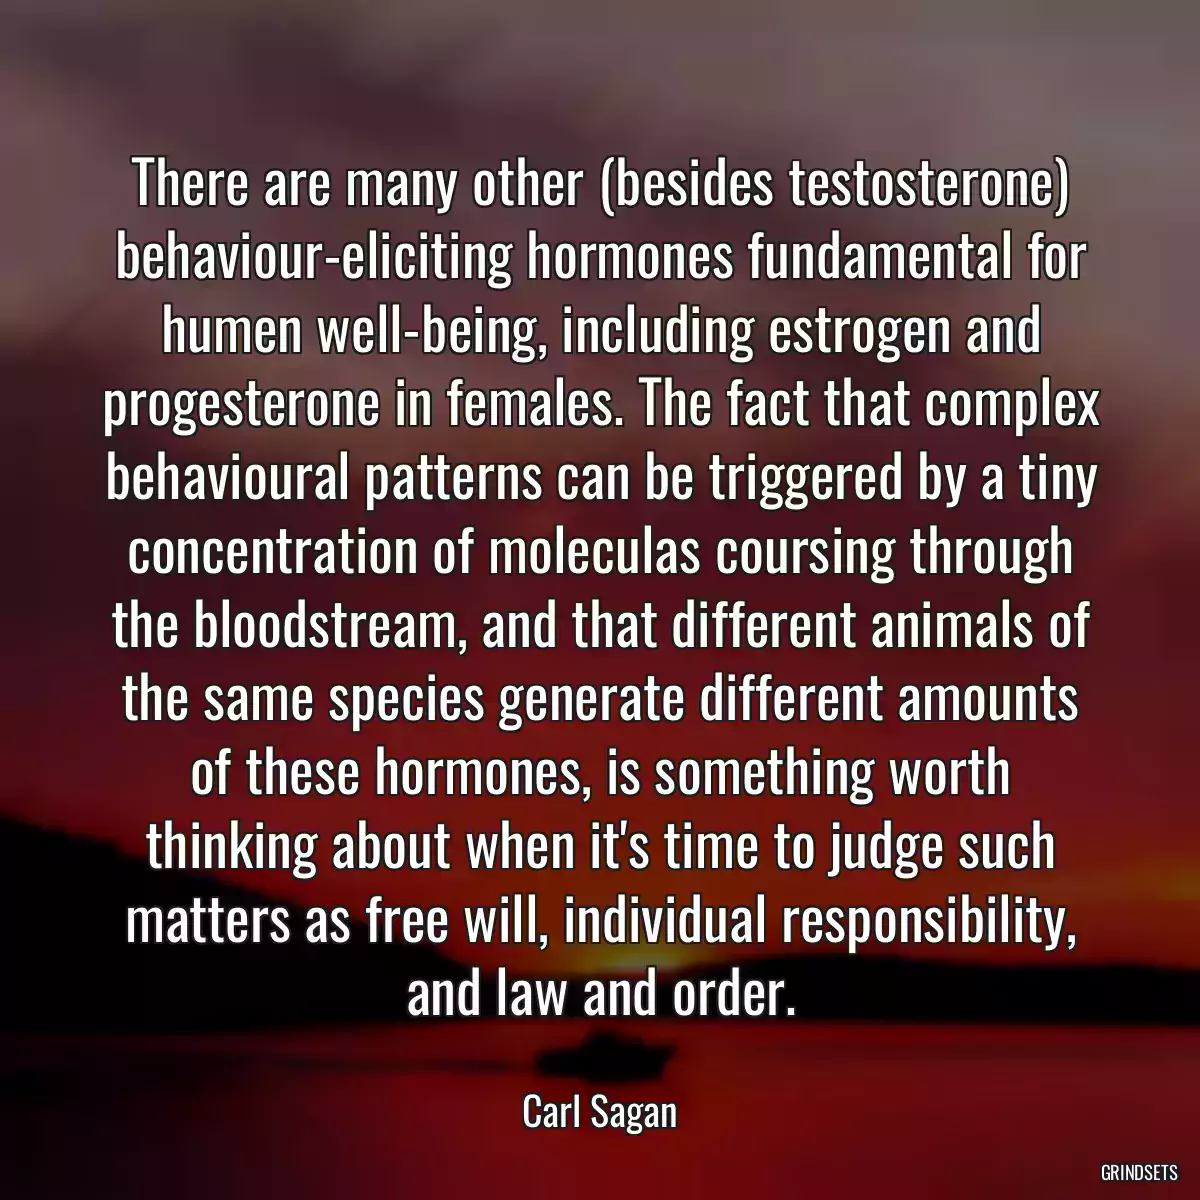 There are many other (besides testosterone) behaviour-eliciting hormones fundamental for humen well-being, including estrogen and progesterone in females. The fact that complex behavioural patterns can be triggered by a tiny concentration of moleculas coursing through the bloodstream, and that different animals of the same species generate different amounts of these hormones, is something worth thinking about when it\'s time to judge such matters as free will, individual responsibility, and law and order.